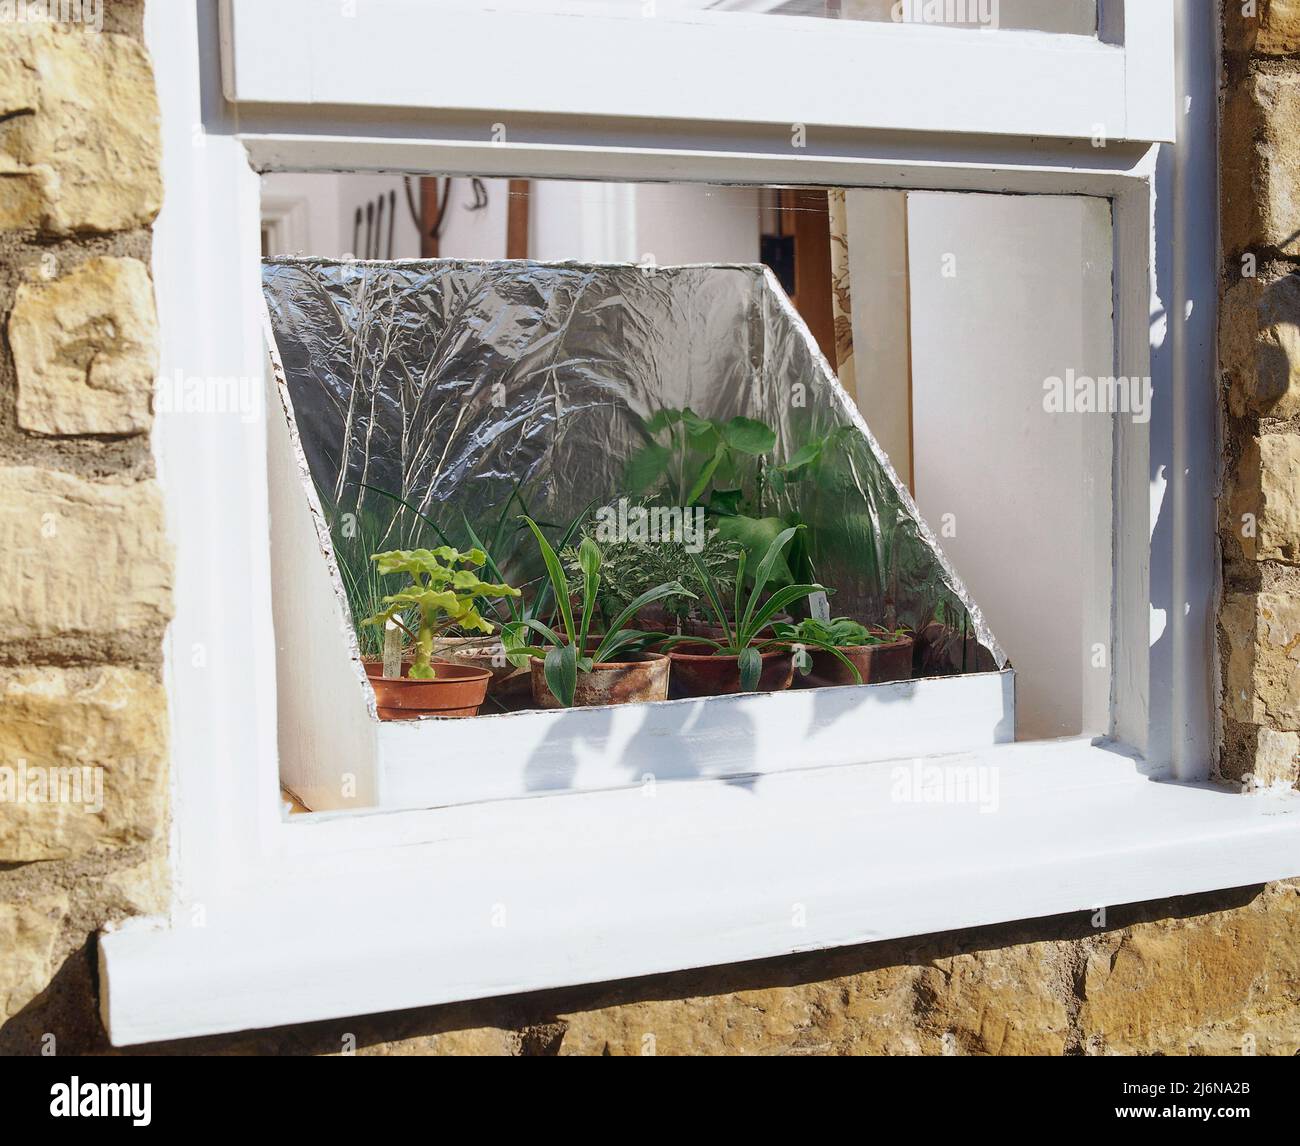 The completed seedling light box placed on a sunny windowsill and filled with plant pots containing growing plants. Stock Photo